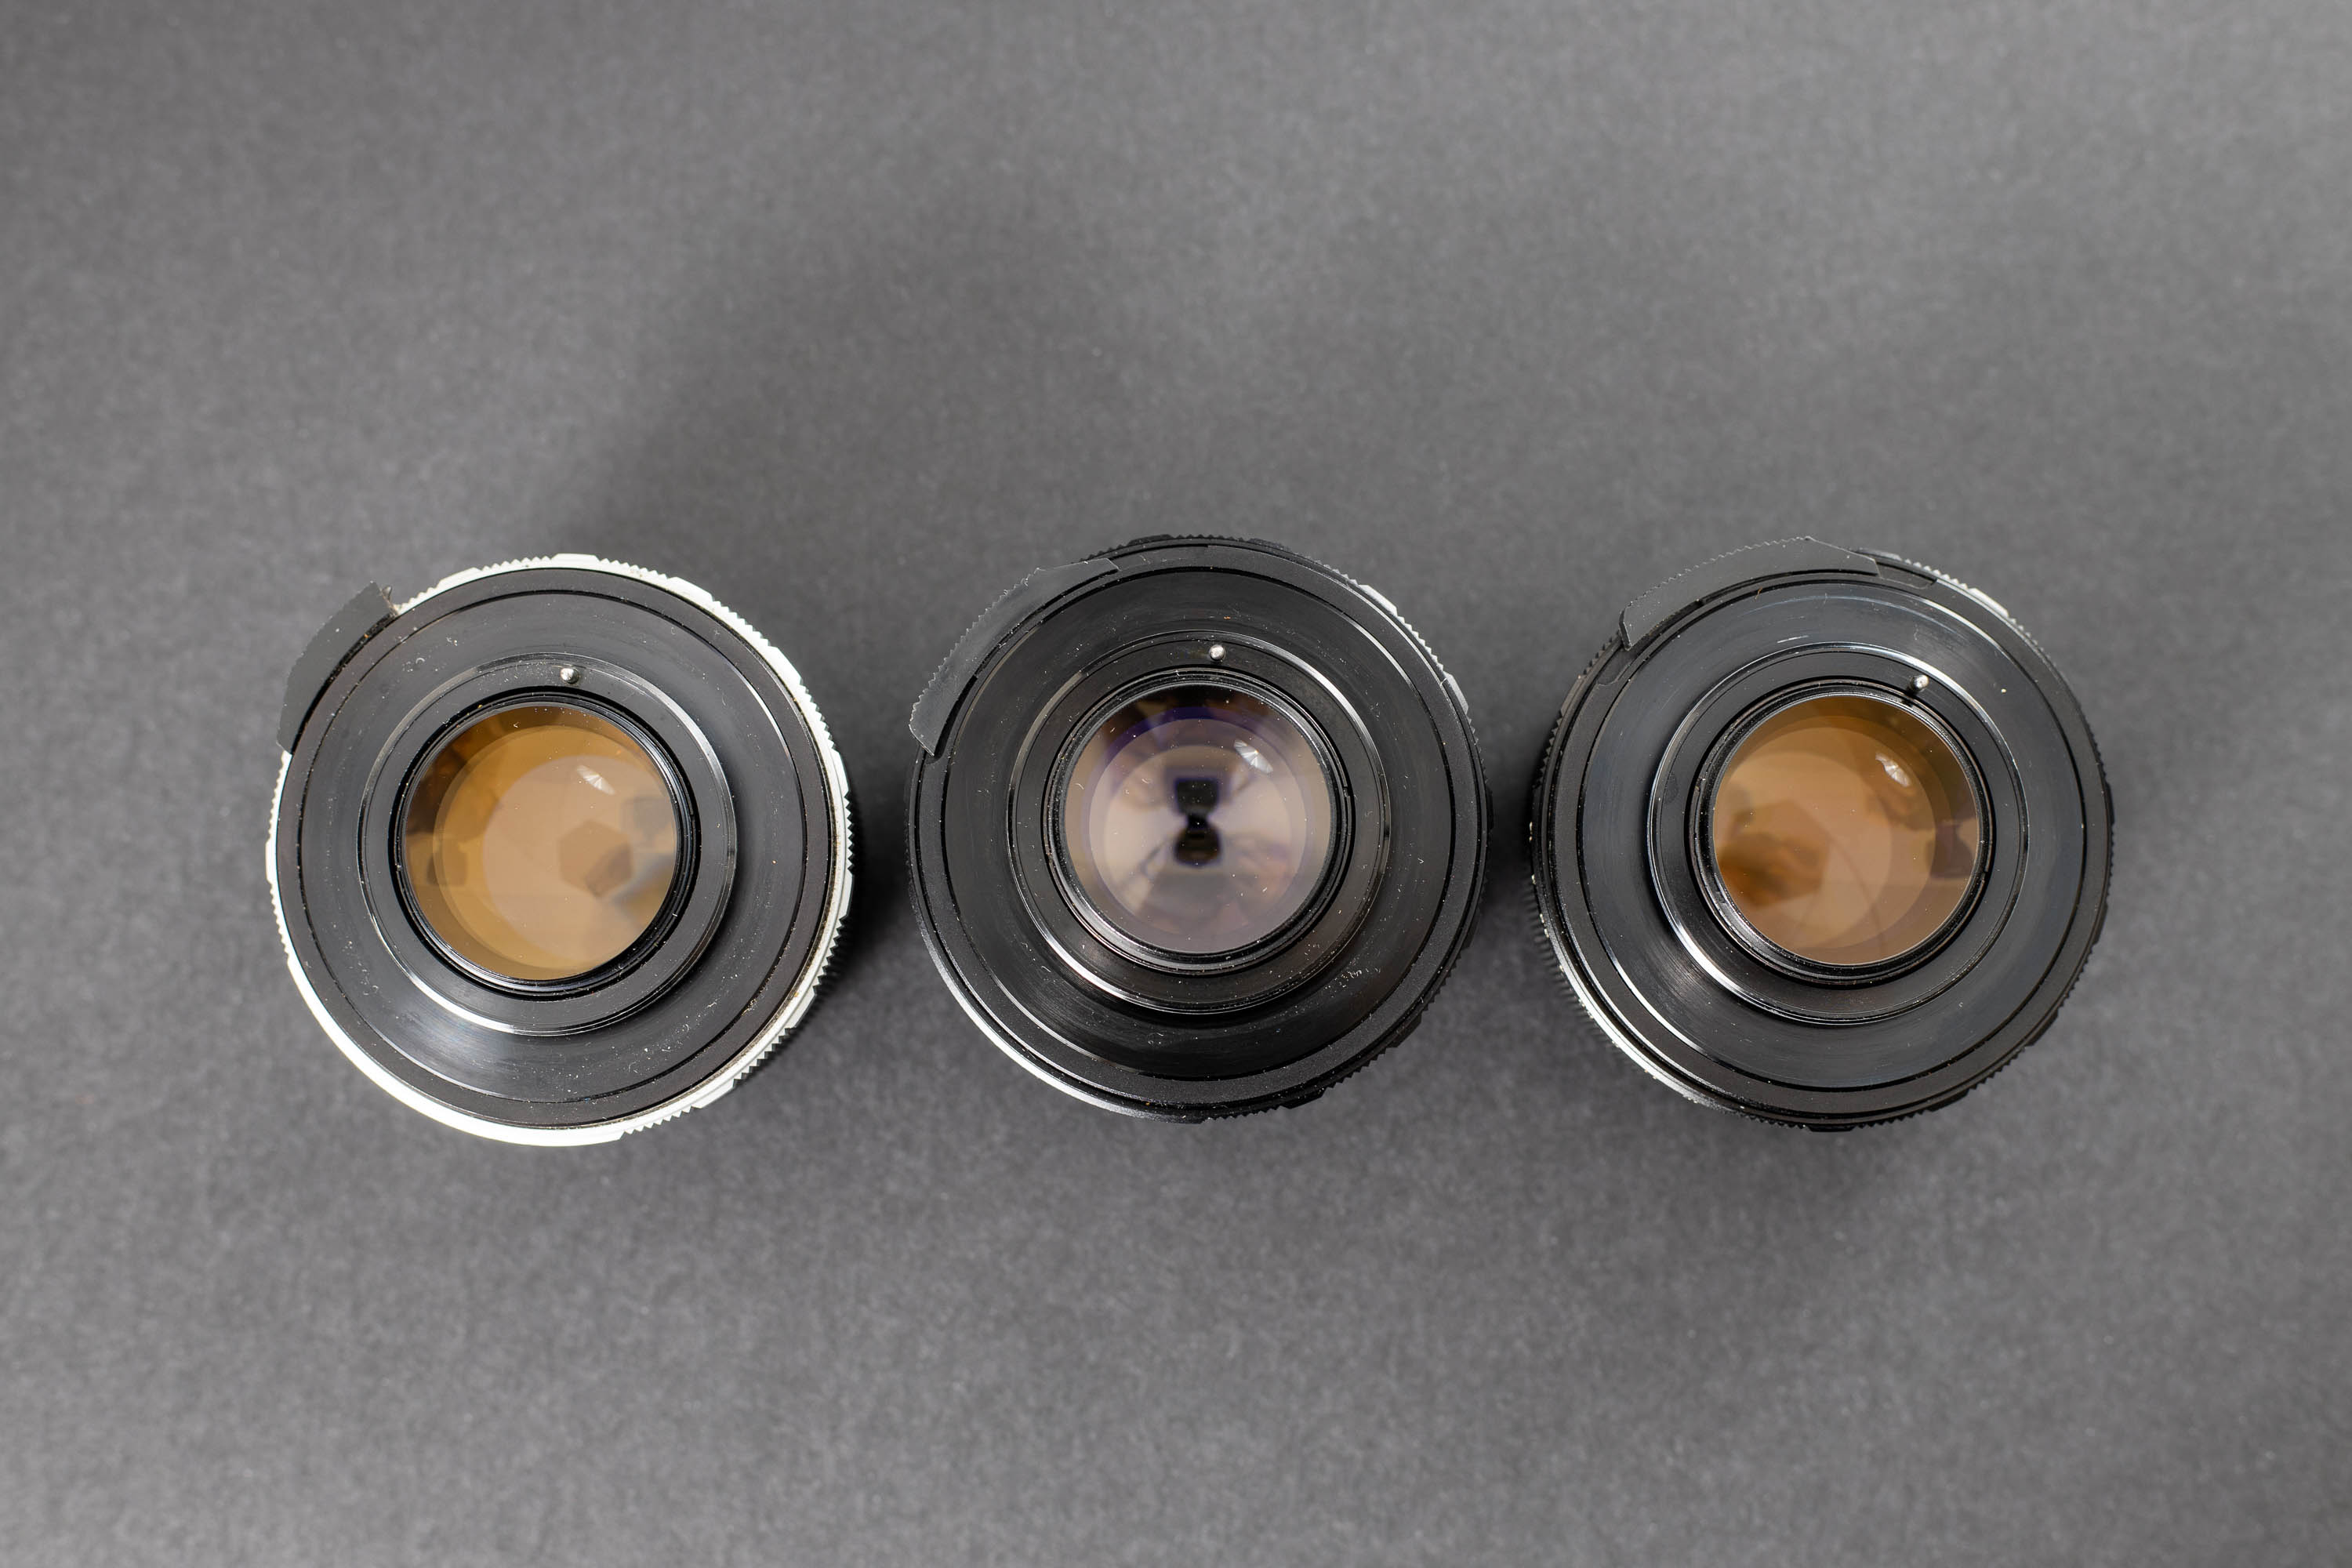 Three Mamiya Sekor 55mm f1.4 lenses - Back view. It is really easy which rear elements have thorium in them.